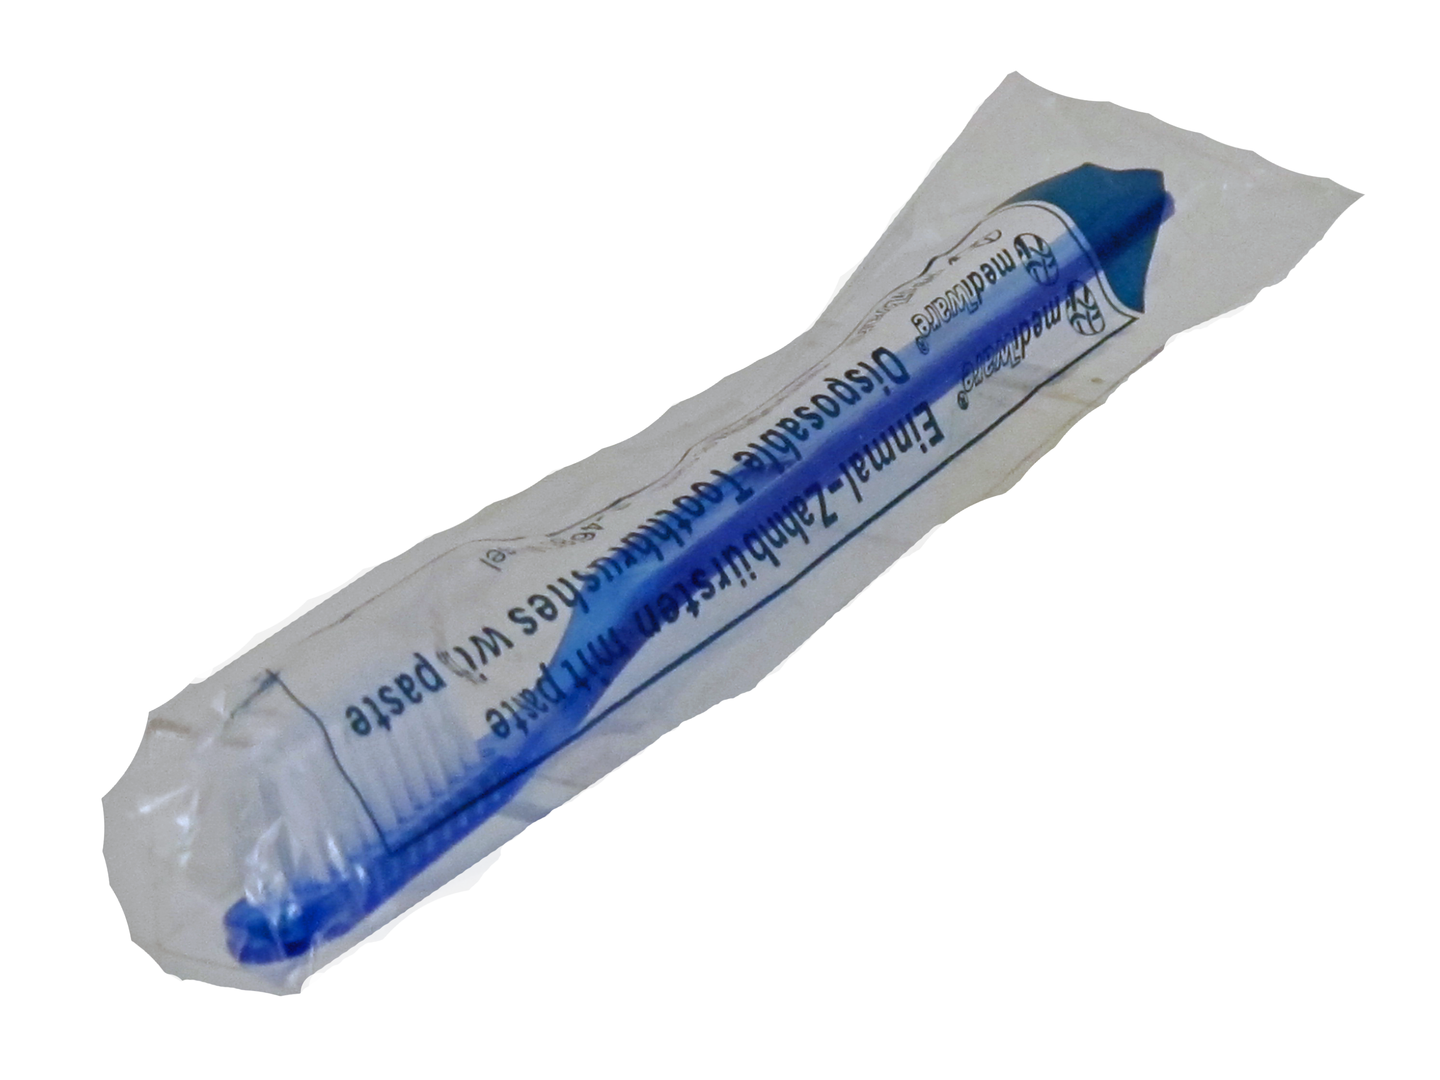 Disposable toothbrush with tooth powder set of 10